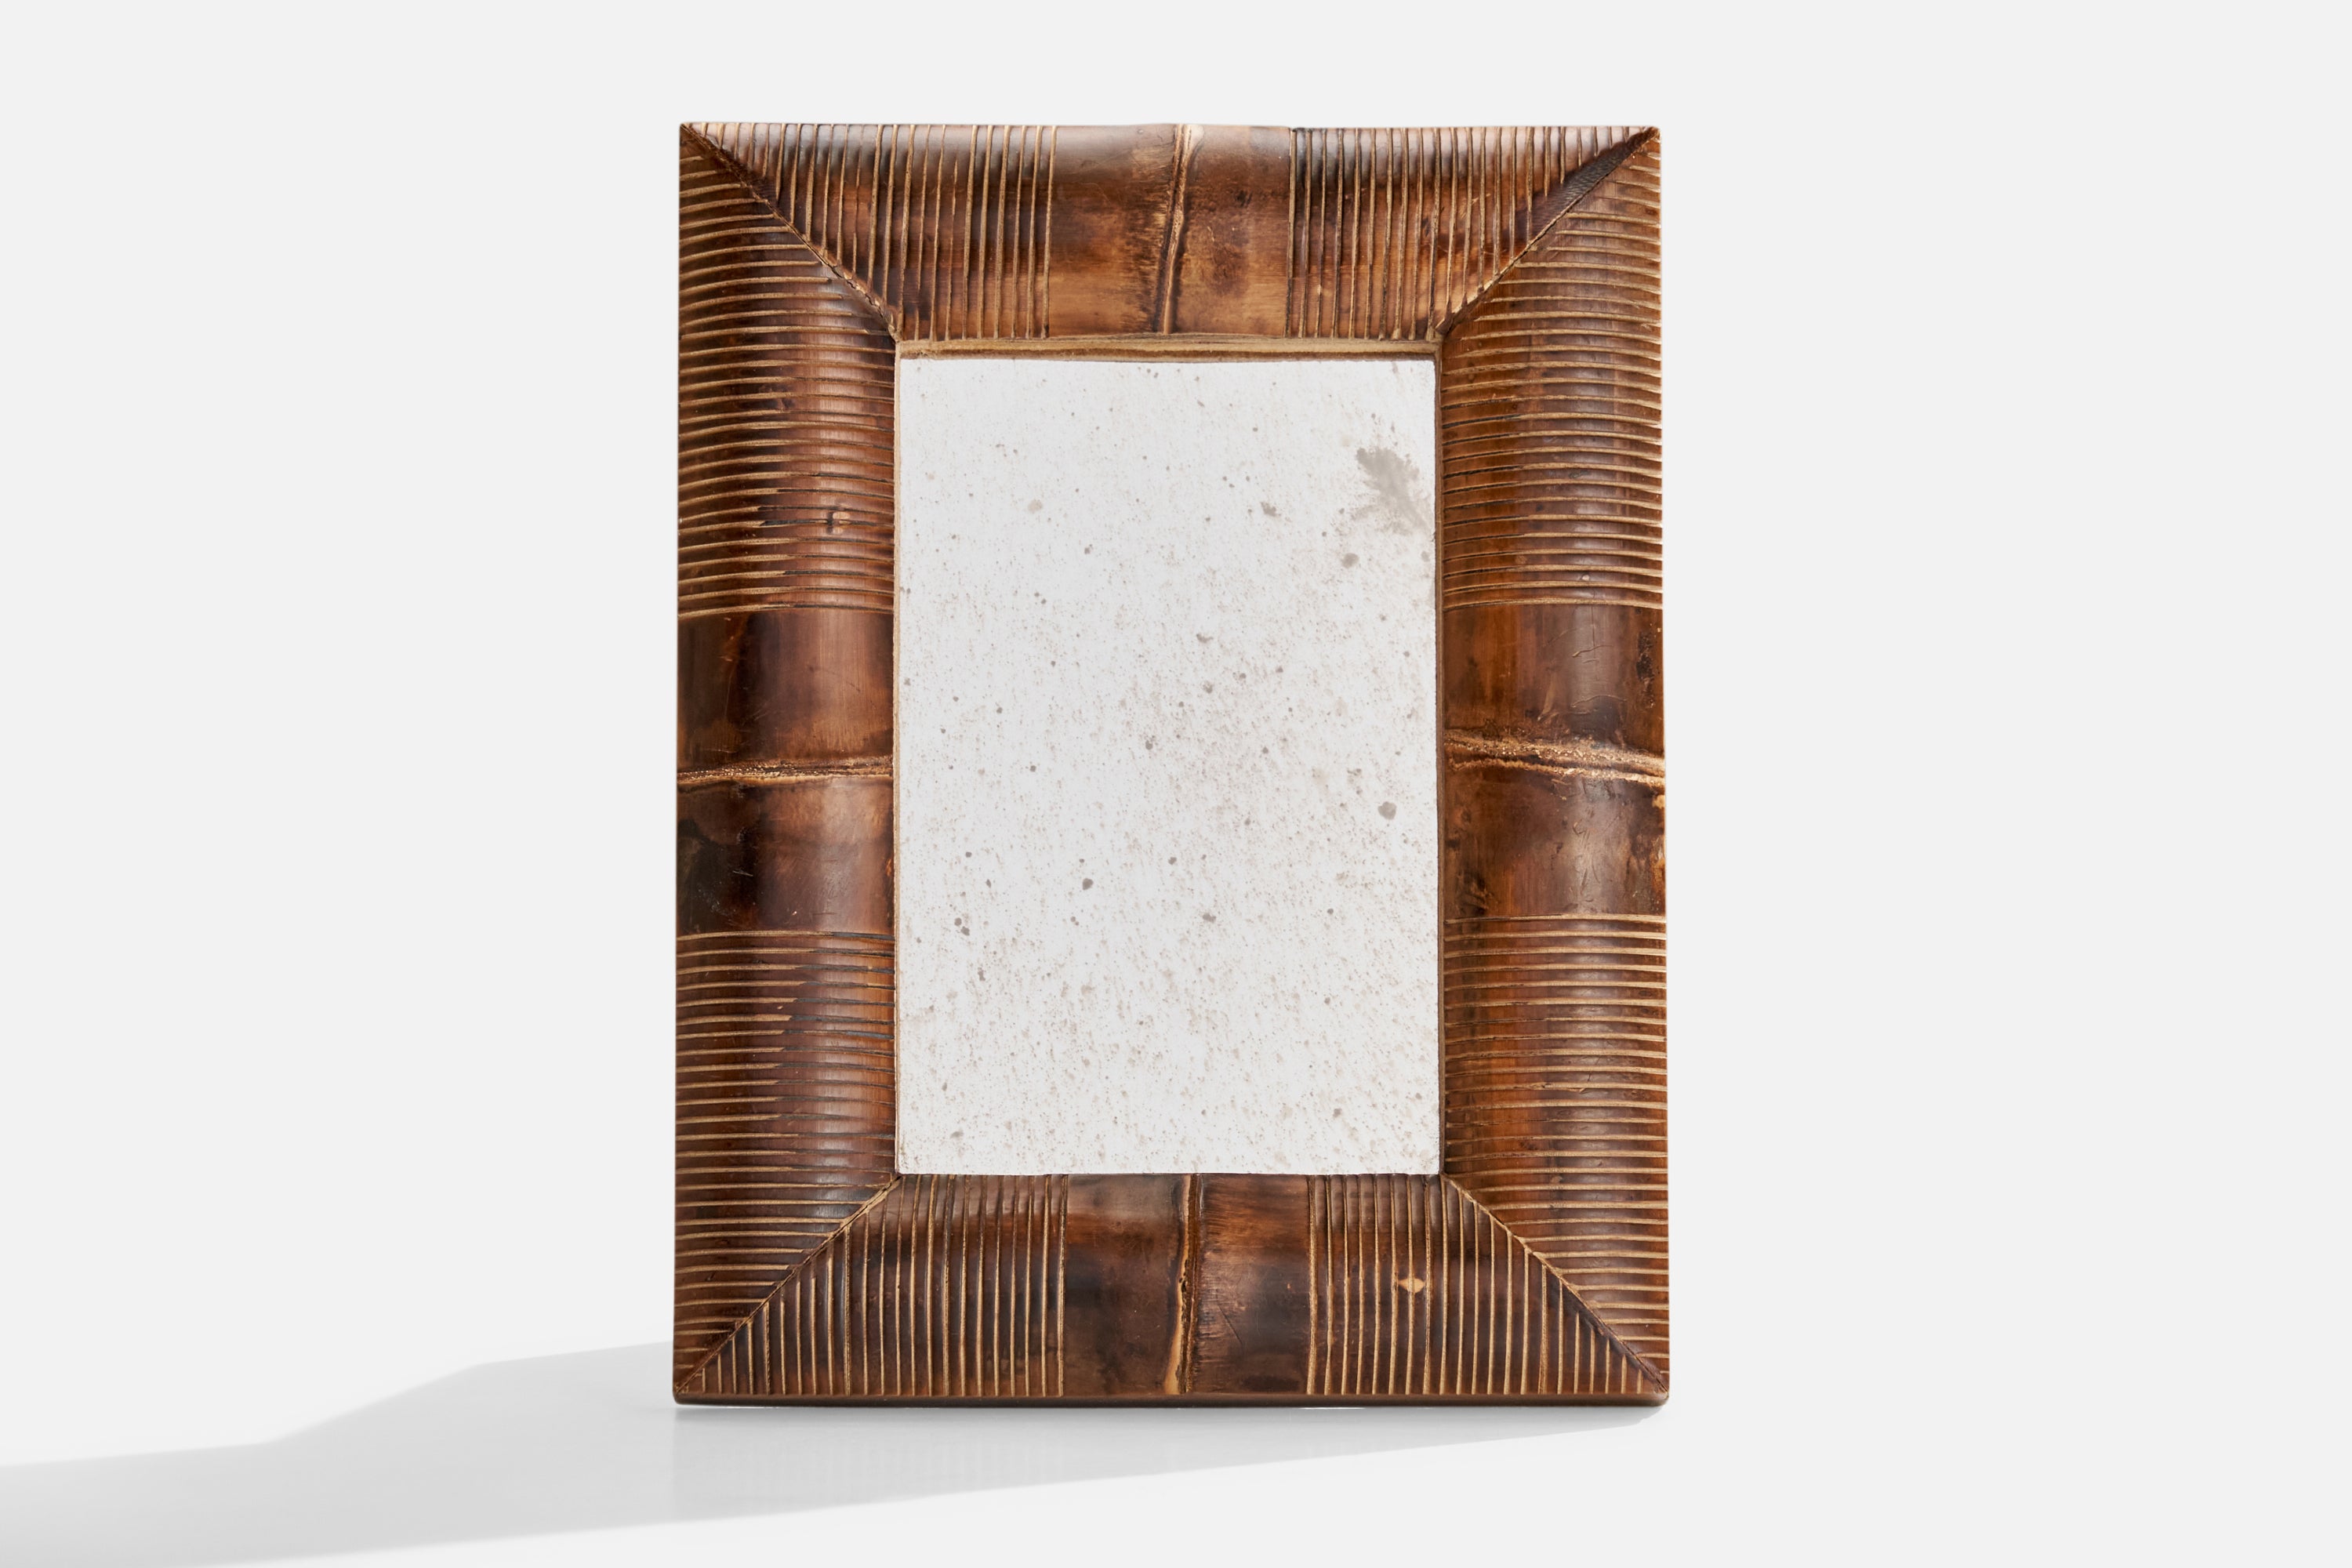 Italian Designer, Small Wall Mirror, Wood, Italy, 1940s For Sale